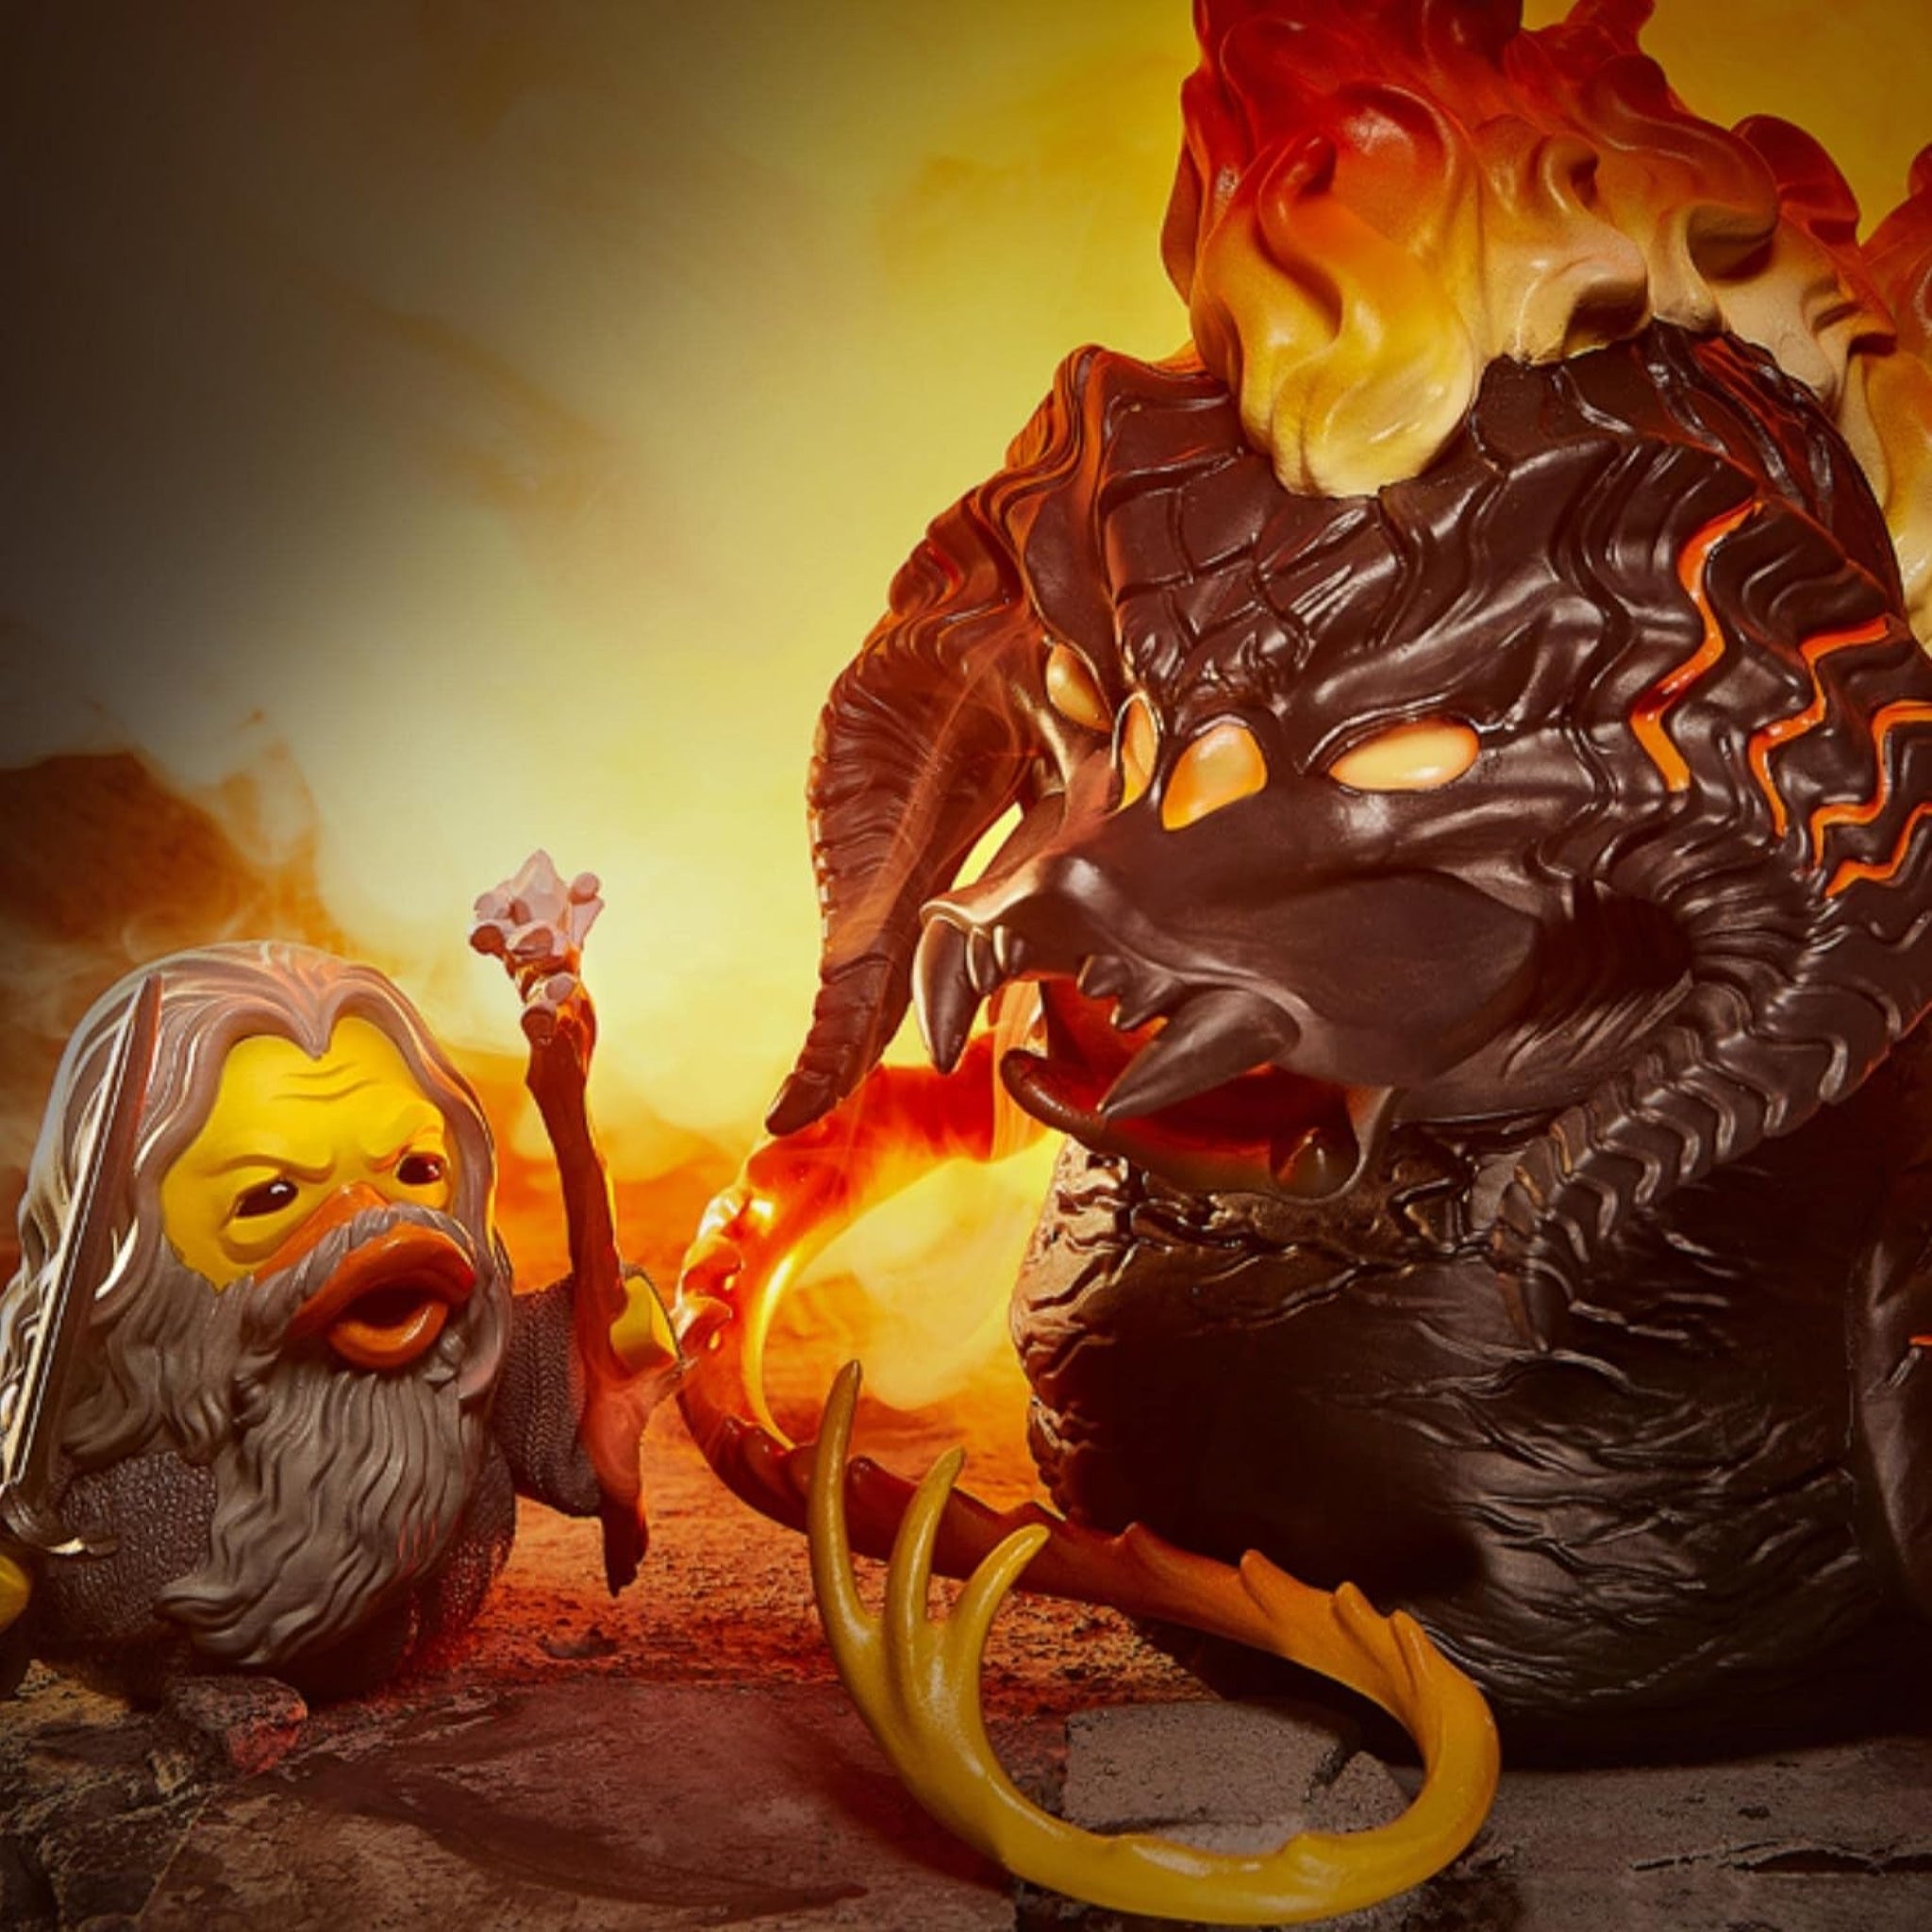 TUBBZ Lord Of The Rings Balrog Giant Collectible Vinyl Rubber Duck Figure